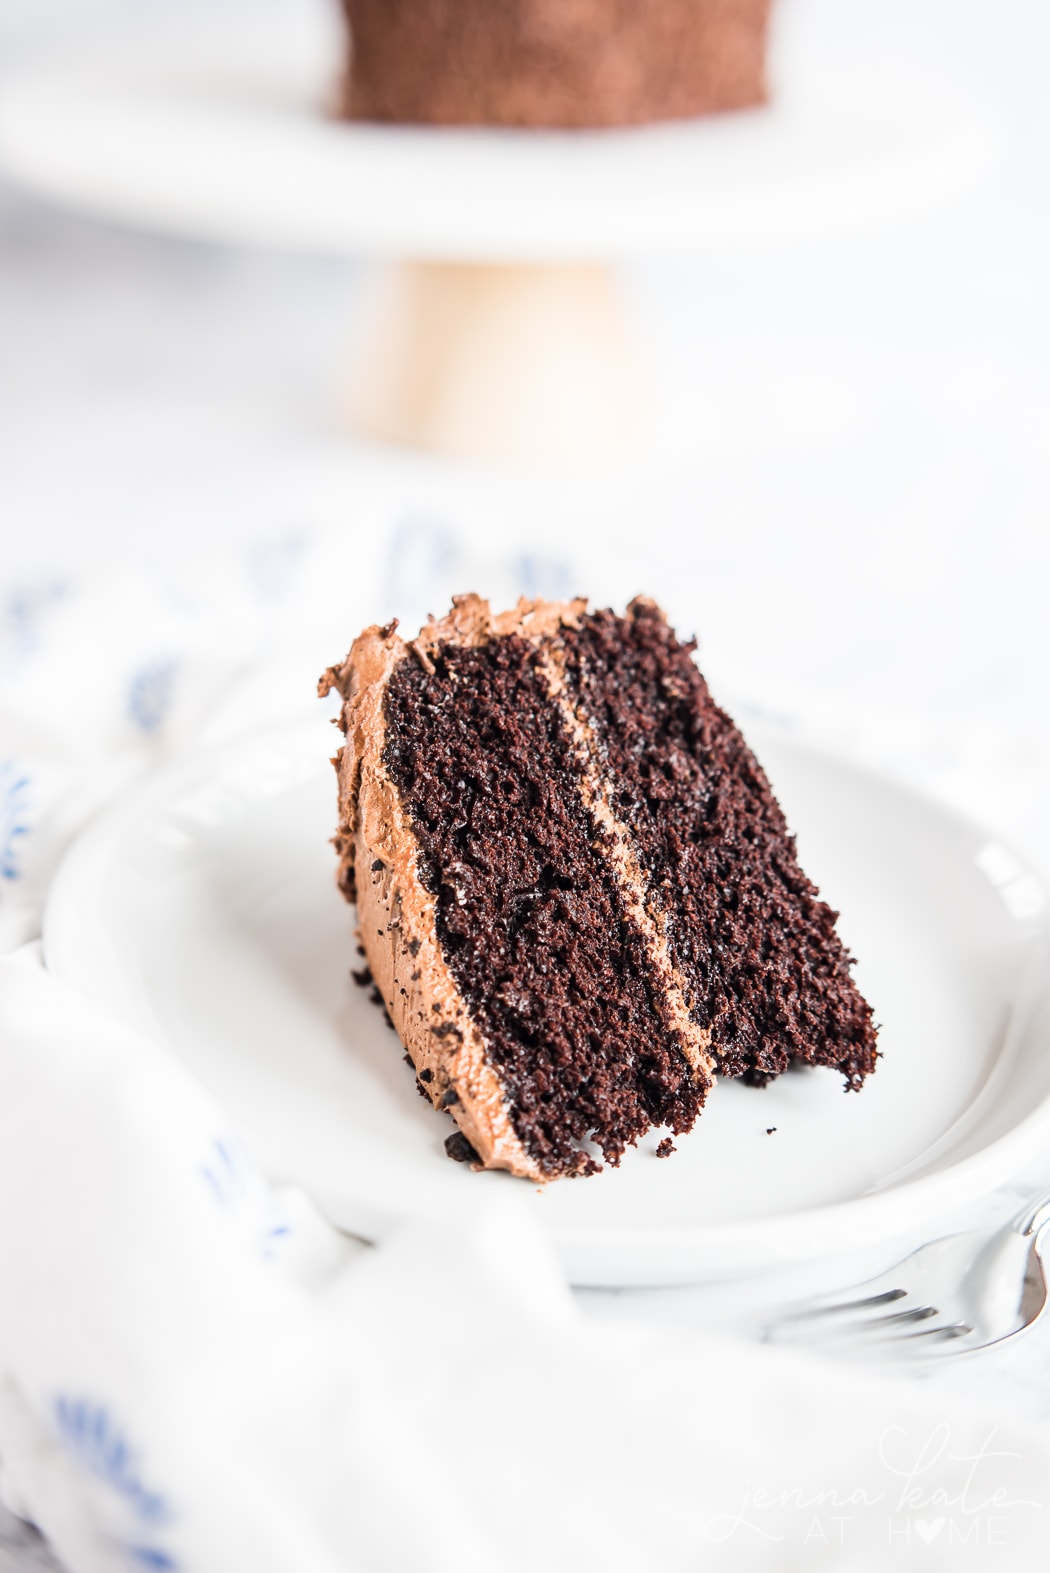 Slice of homemade chocolate cake with buttercream frosting